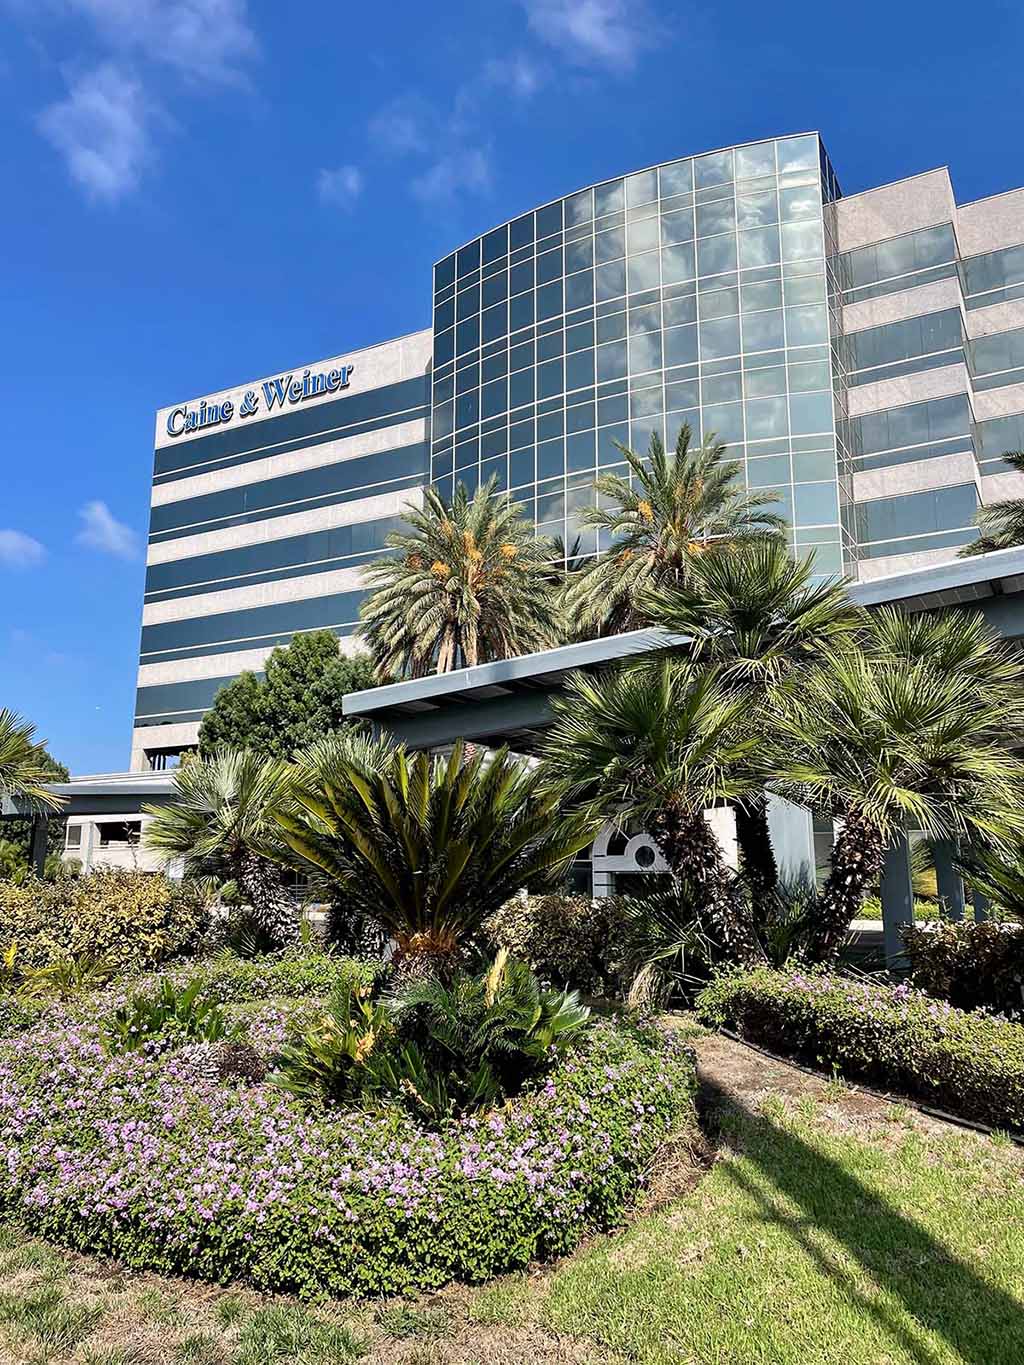 Southern California Multi-Specialty Center serves patients from Century City